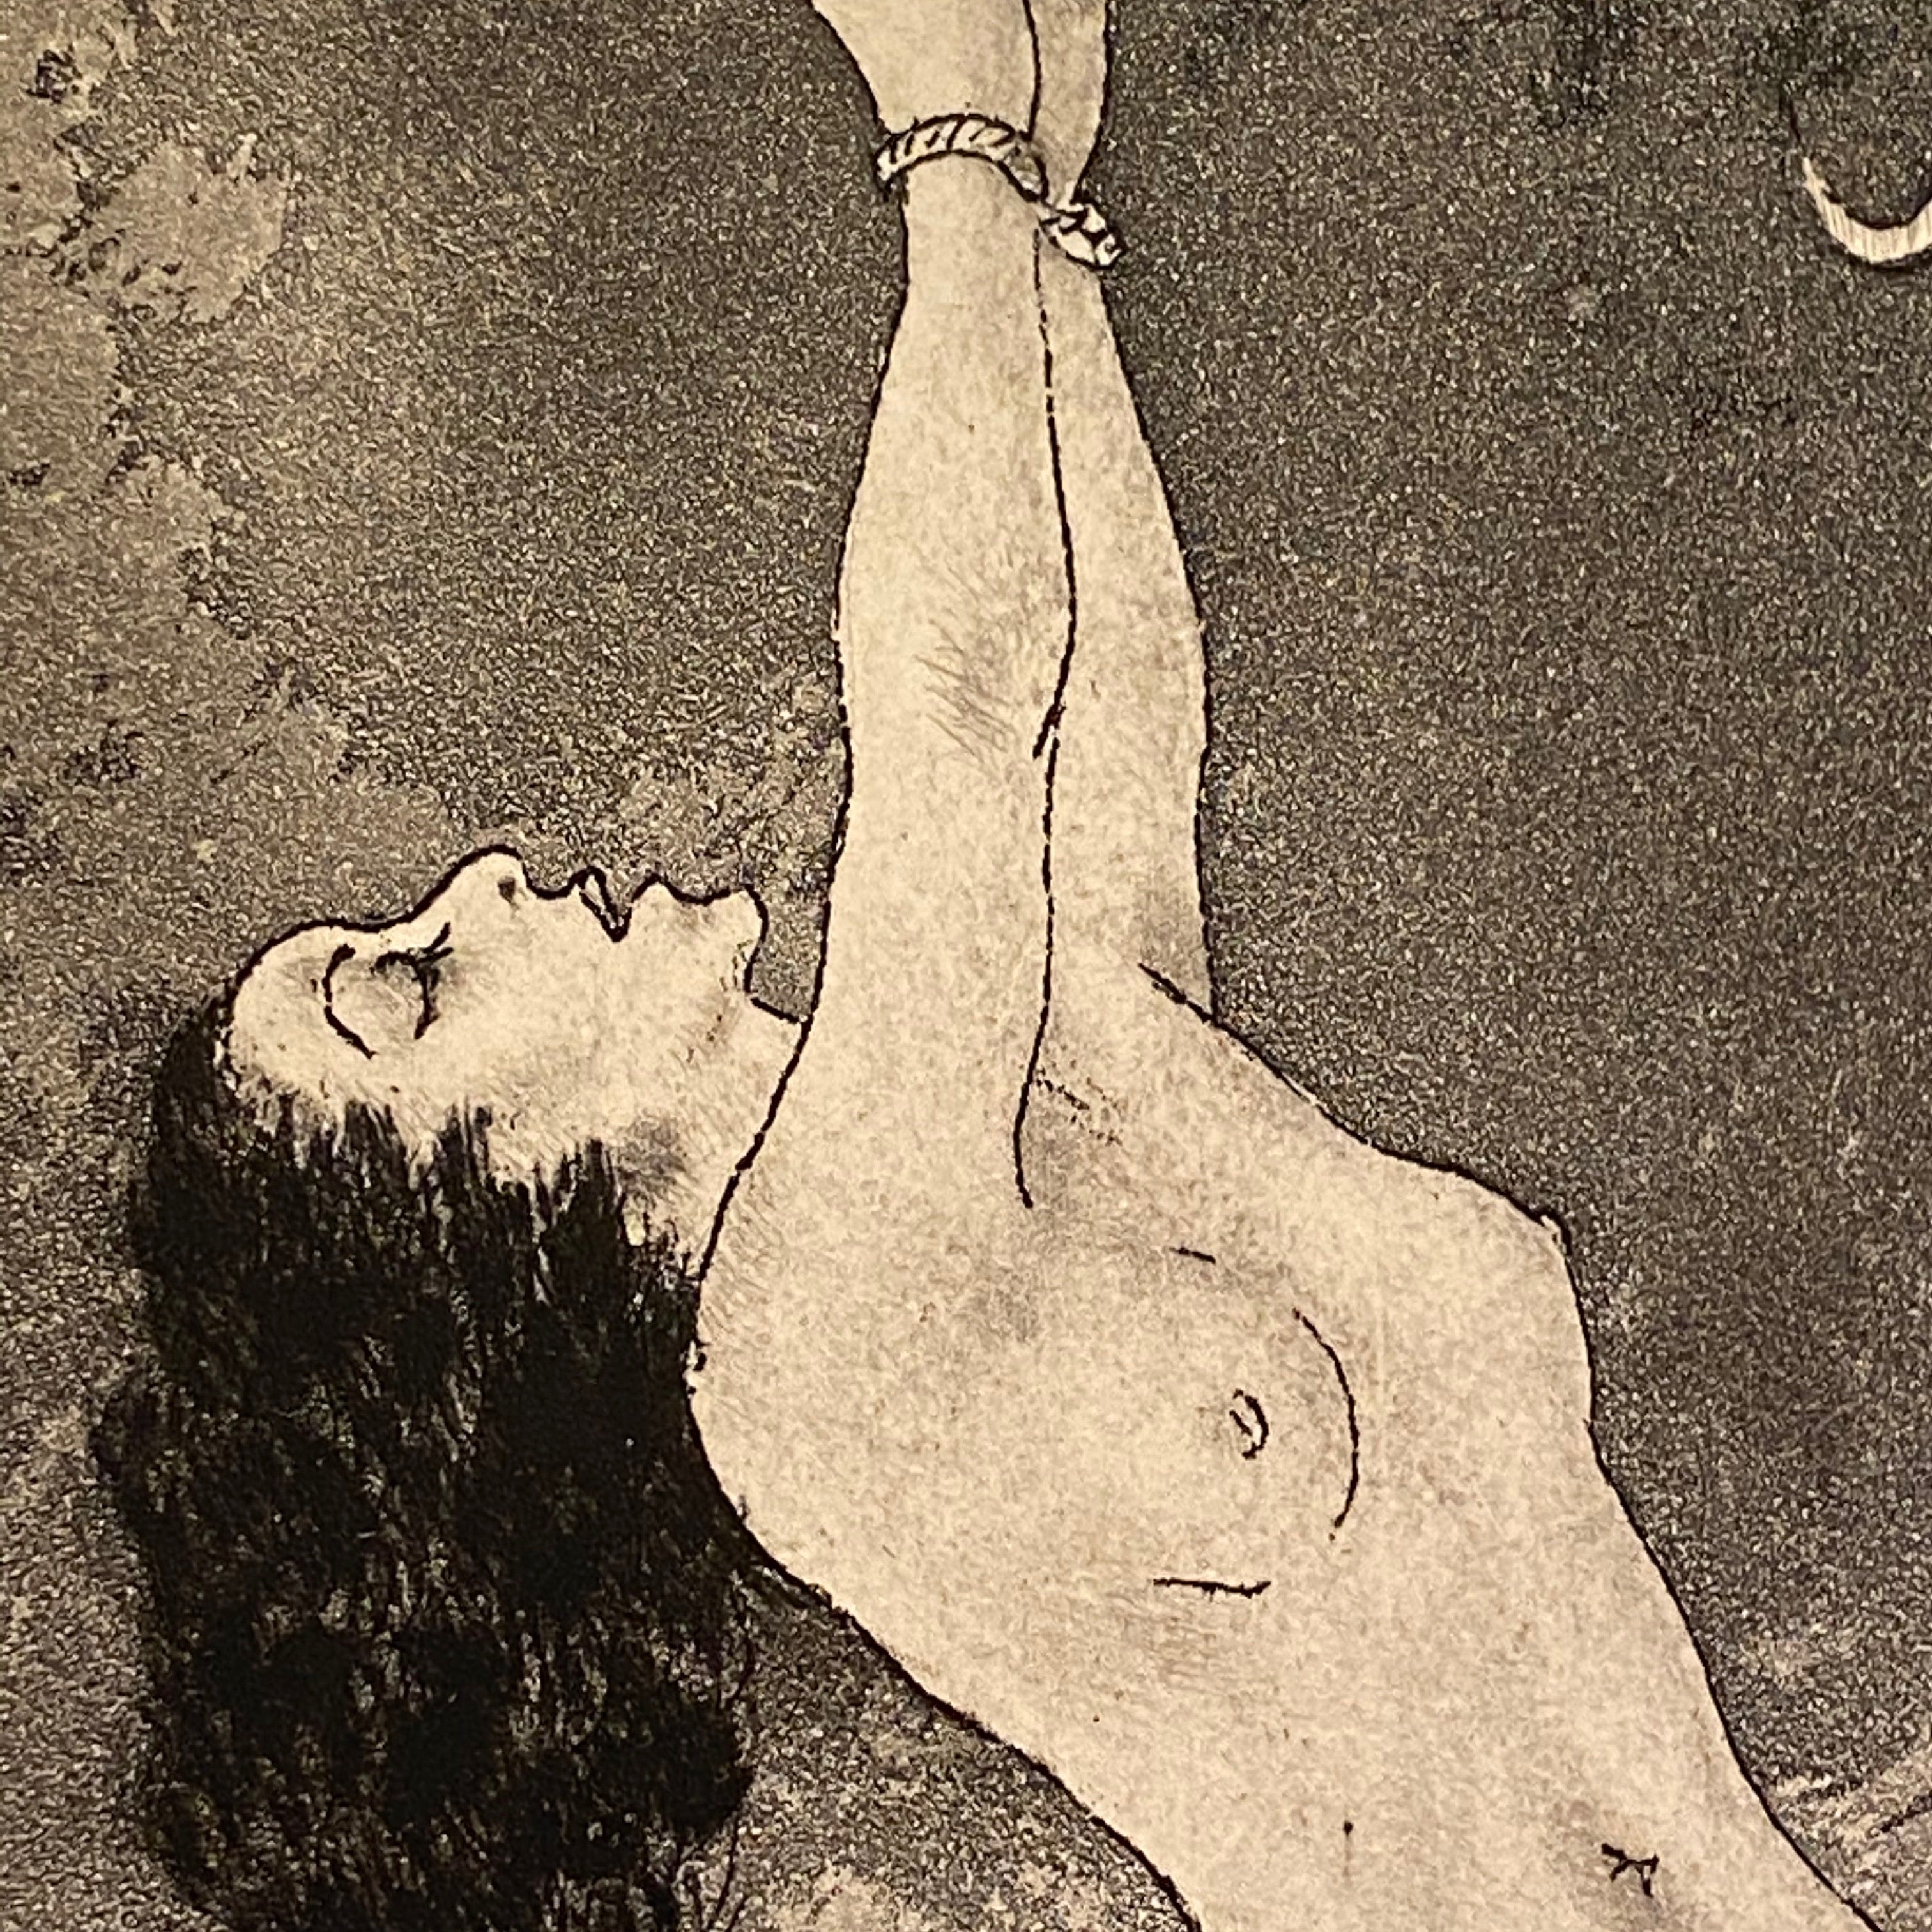 Nude Woman in Edouard Chimot Etching of Woman in Bondage - 1920s - Role Reversal - Rare French Print - Drawings - Risque Underground Art  - Bondage